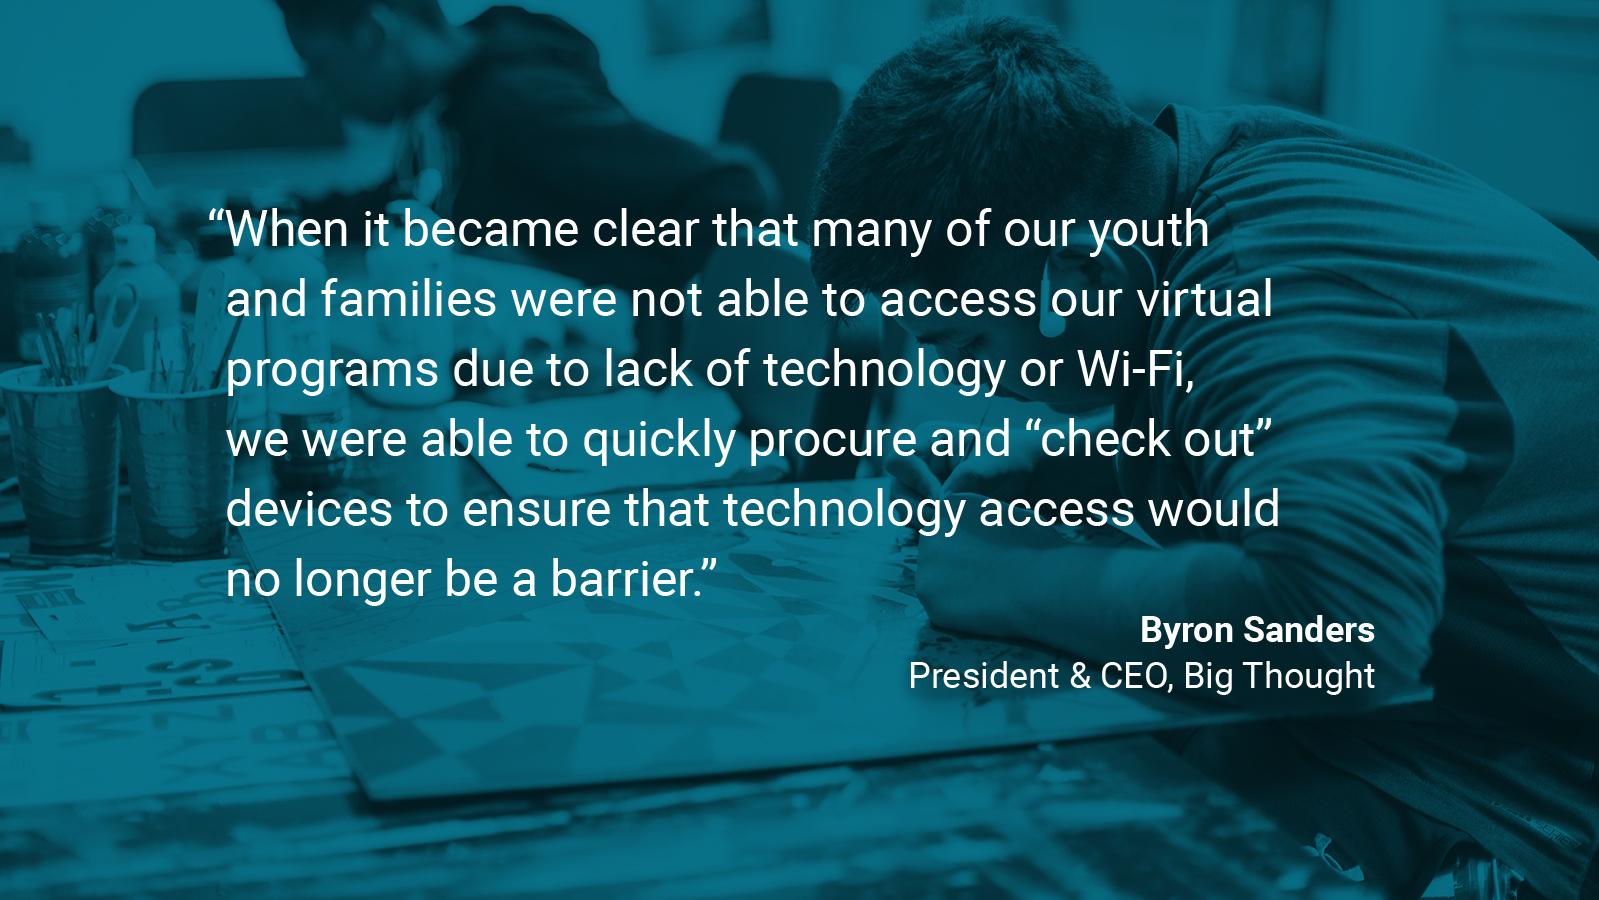 (slide 4 of 4) Quote by: Byron Sanders, President & CEO of Big Thought: "When it became clear that many of our youth and families were not able to access our virtual programs due to lack of technology or WIFI, we were able to quickly procure and “check out” devices to ensure that technology access would no longer be a barrier.  . 